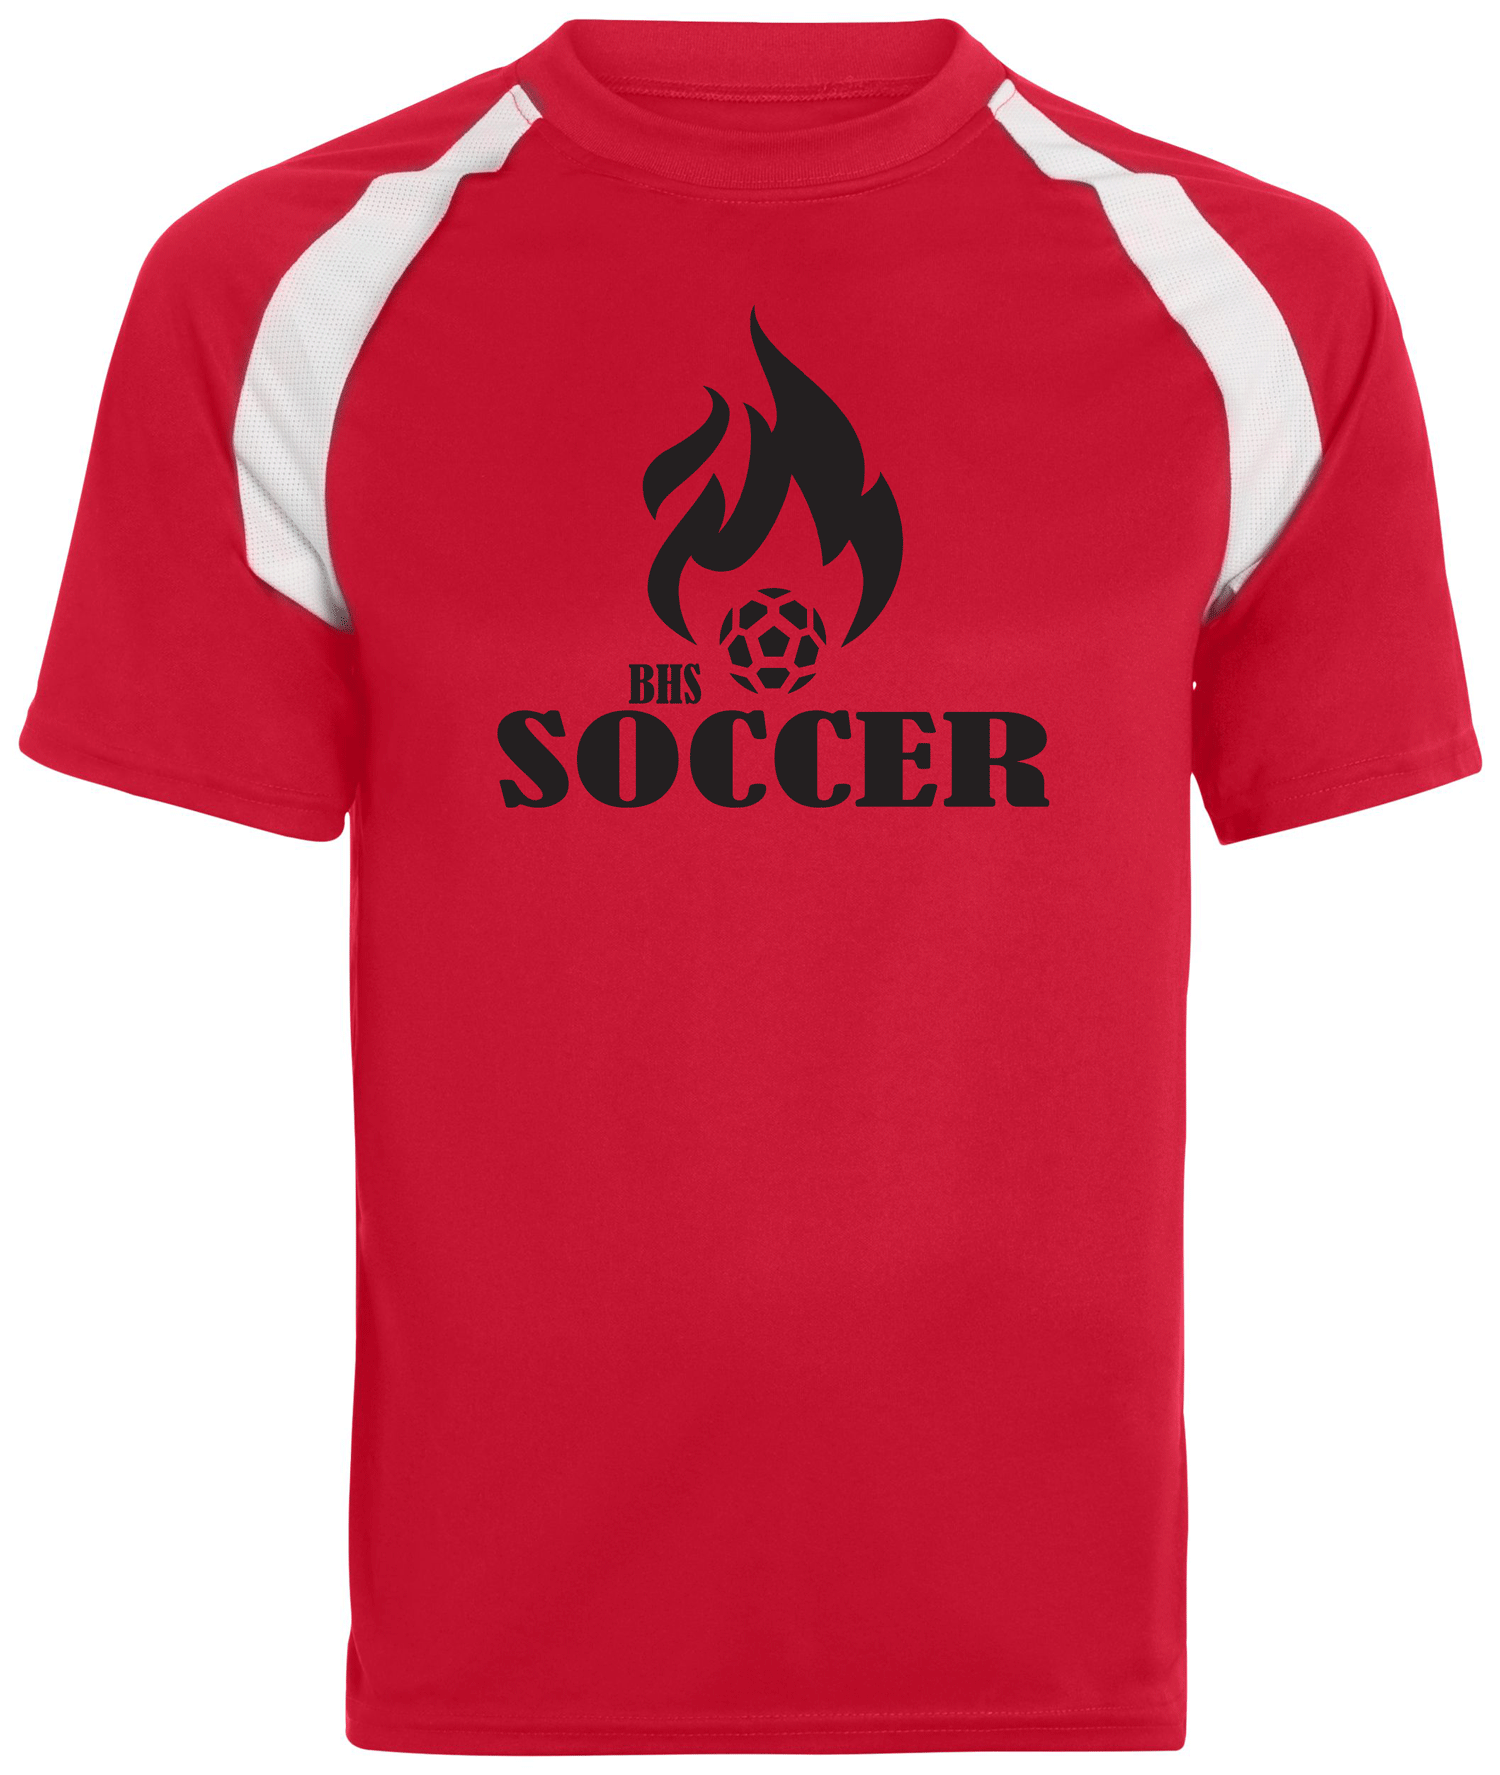 Augusta Performance Wicking Soccer Jersey